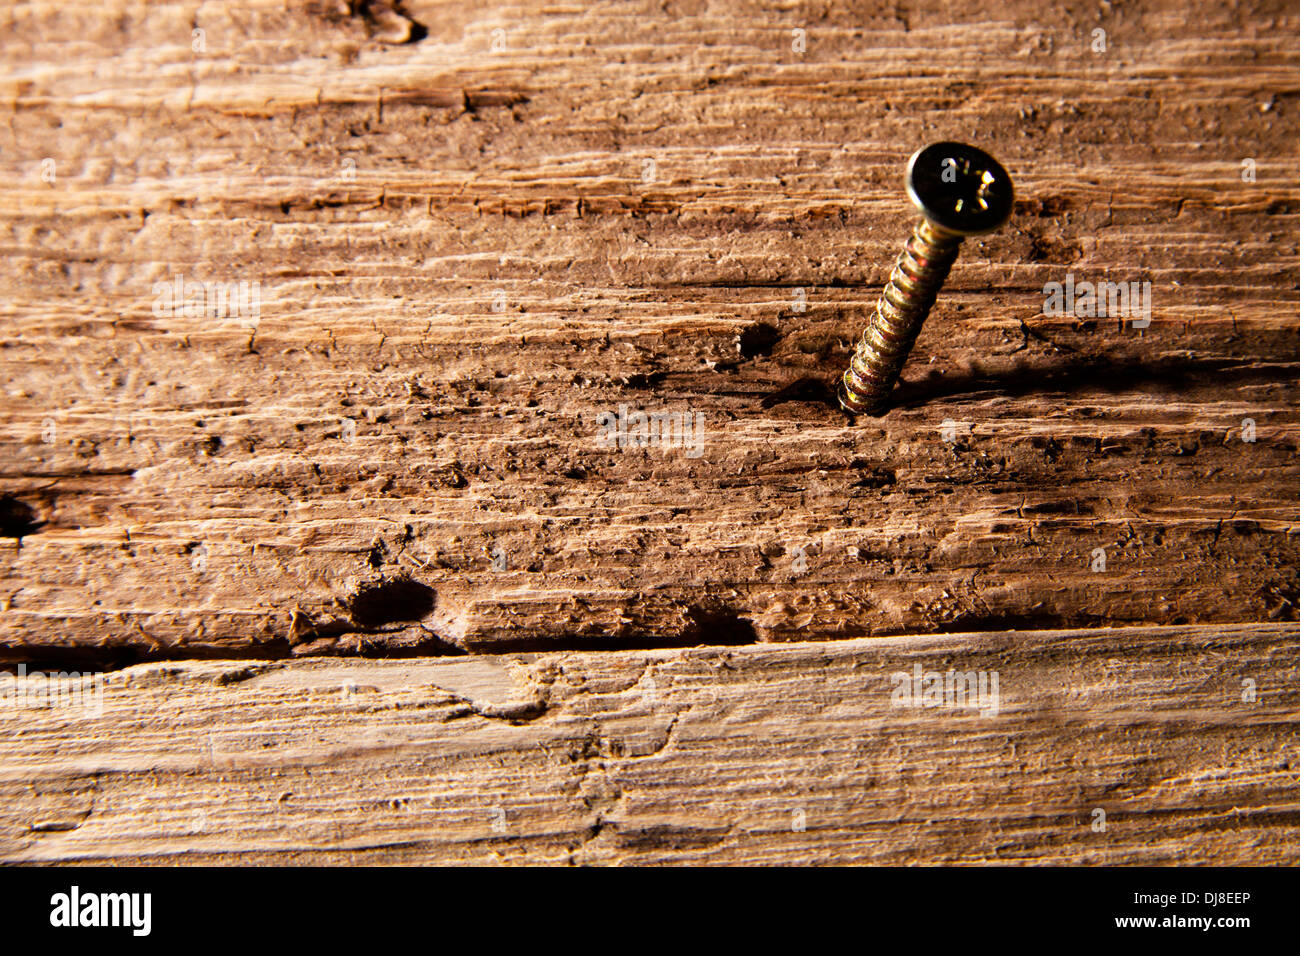 Screw in piece of old wood close up Stock Photo